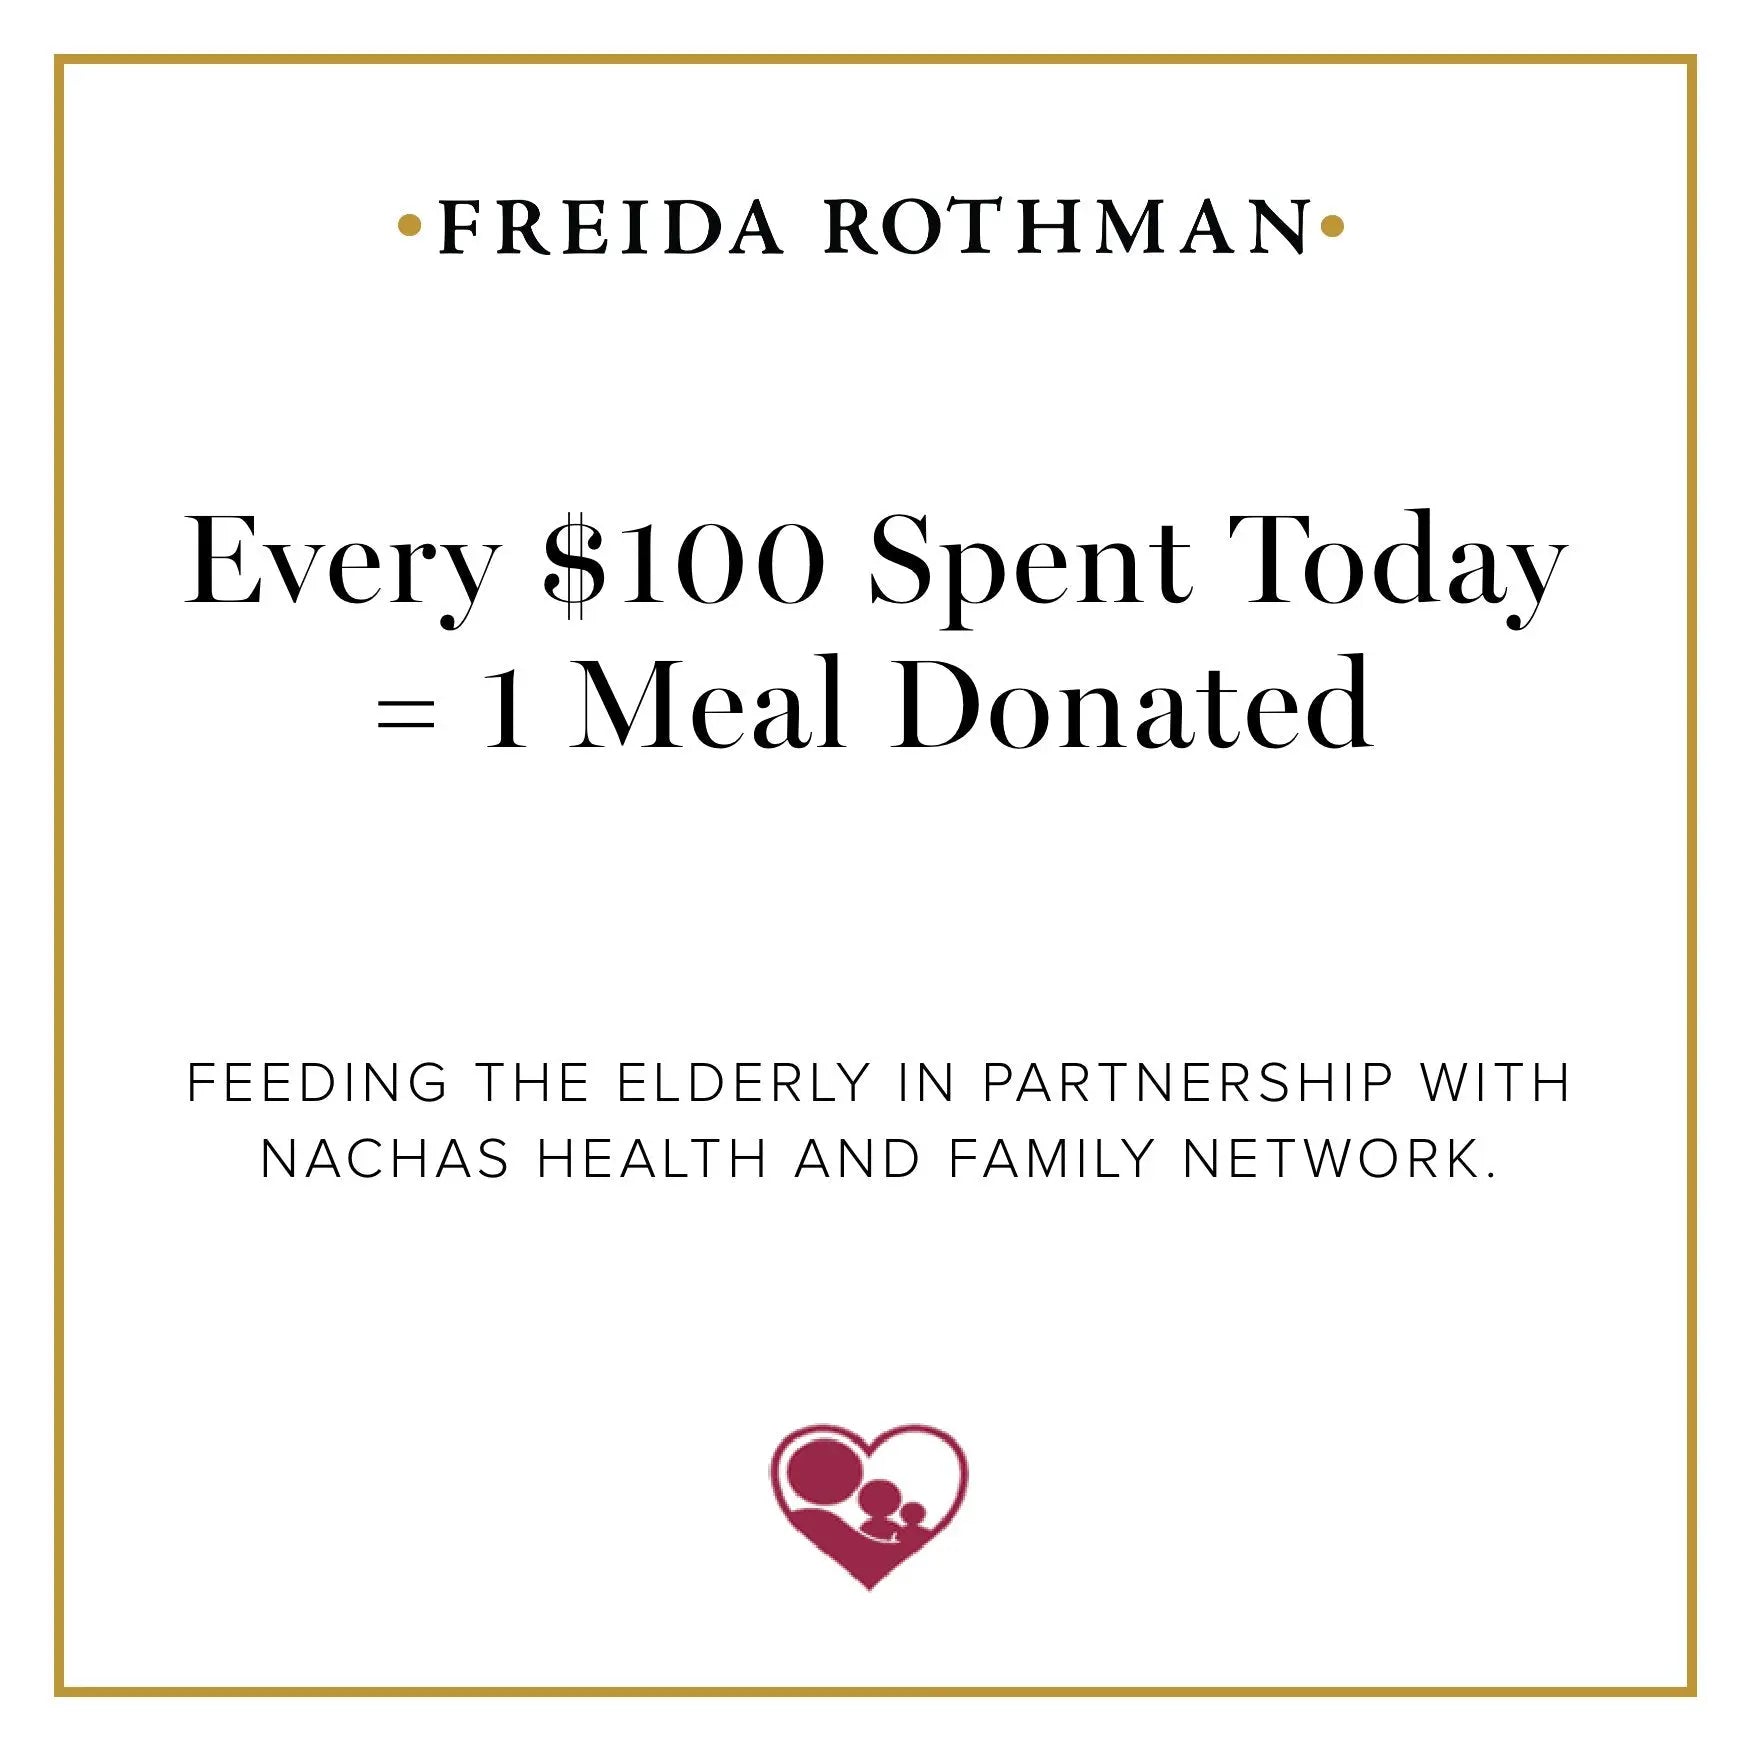  Your Meal Donation to Nachas Health and Family Network FREIDA ROTHMAN 